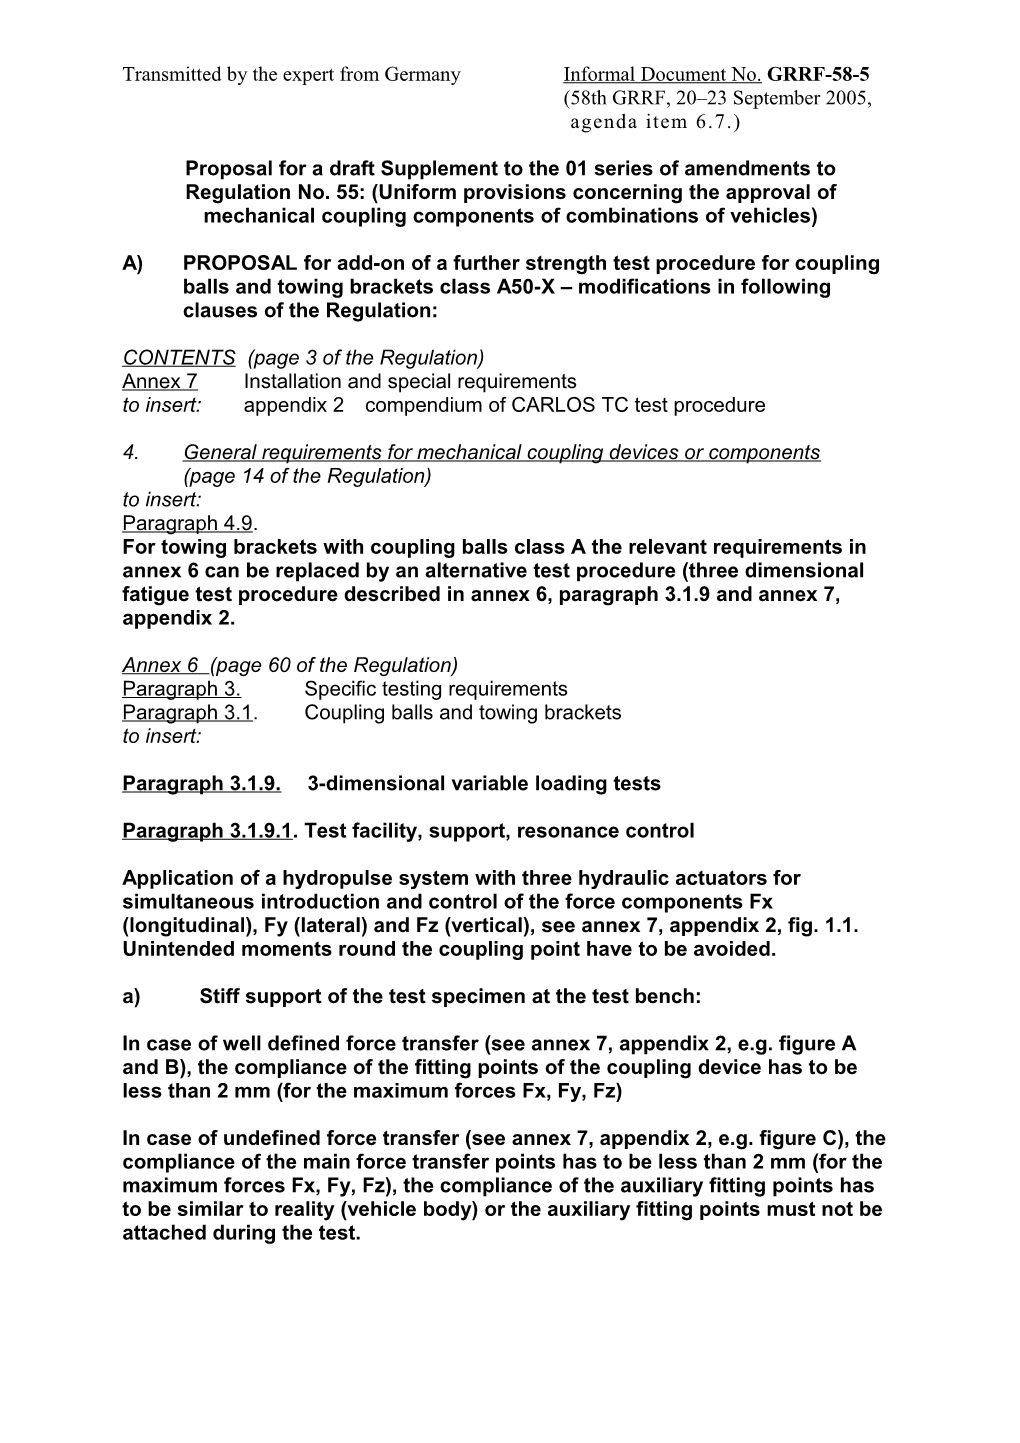 Proposal for Directive Amendment (94/20/EC, Amended by 2003